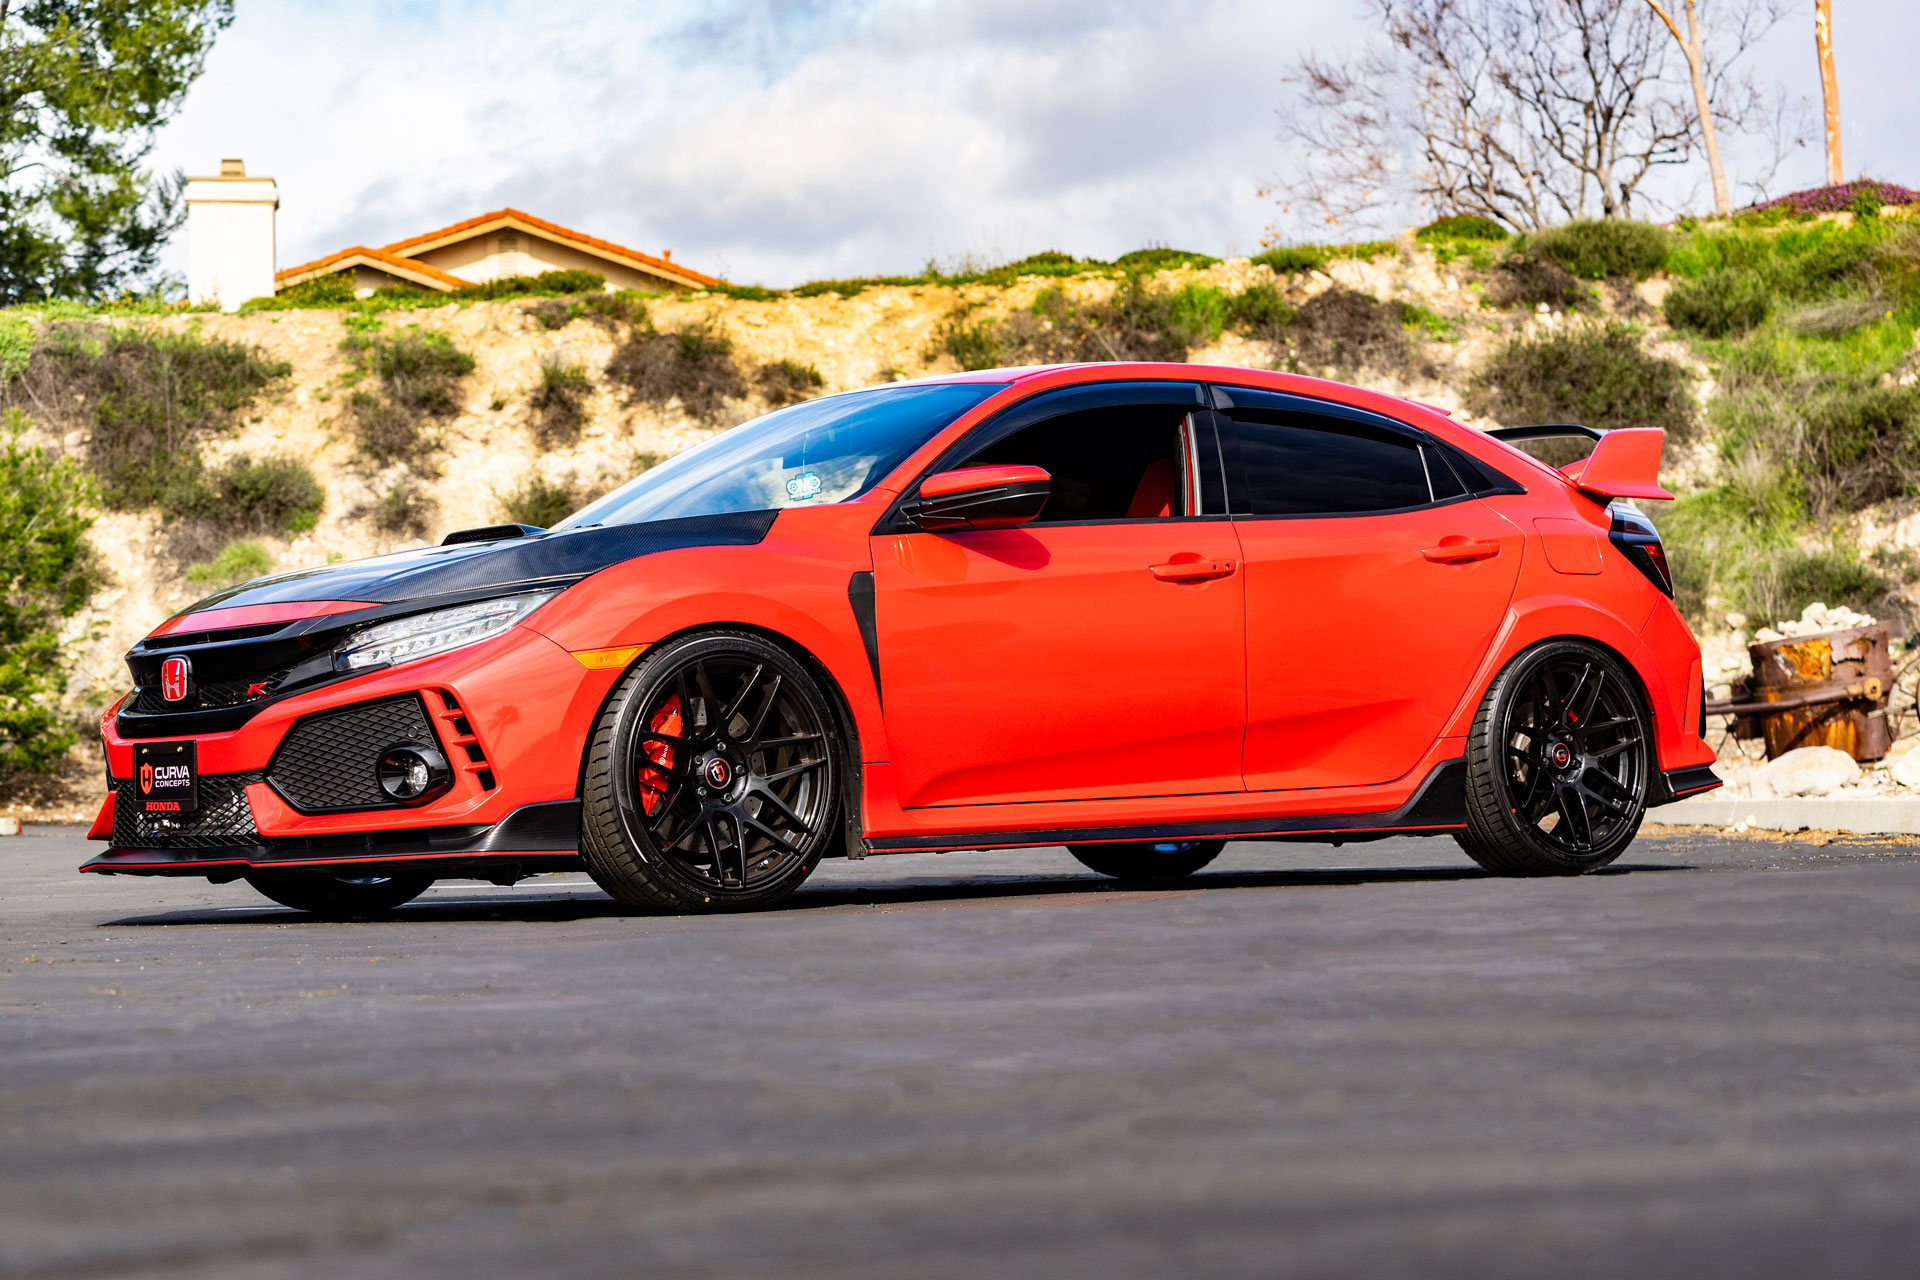 Curva Concepts C300 Aftermarket Wheels on a Honda Civic Type-R